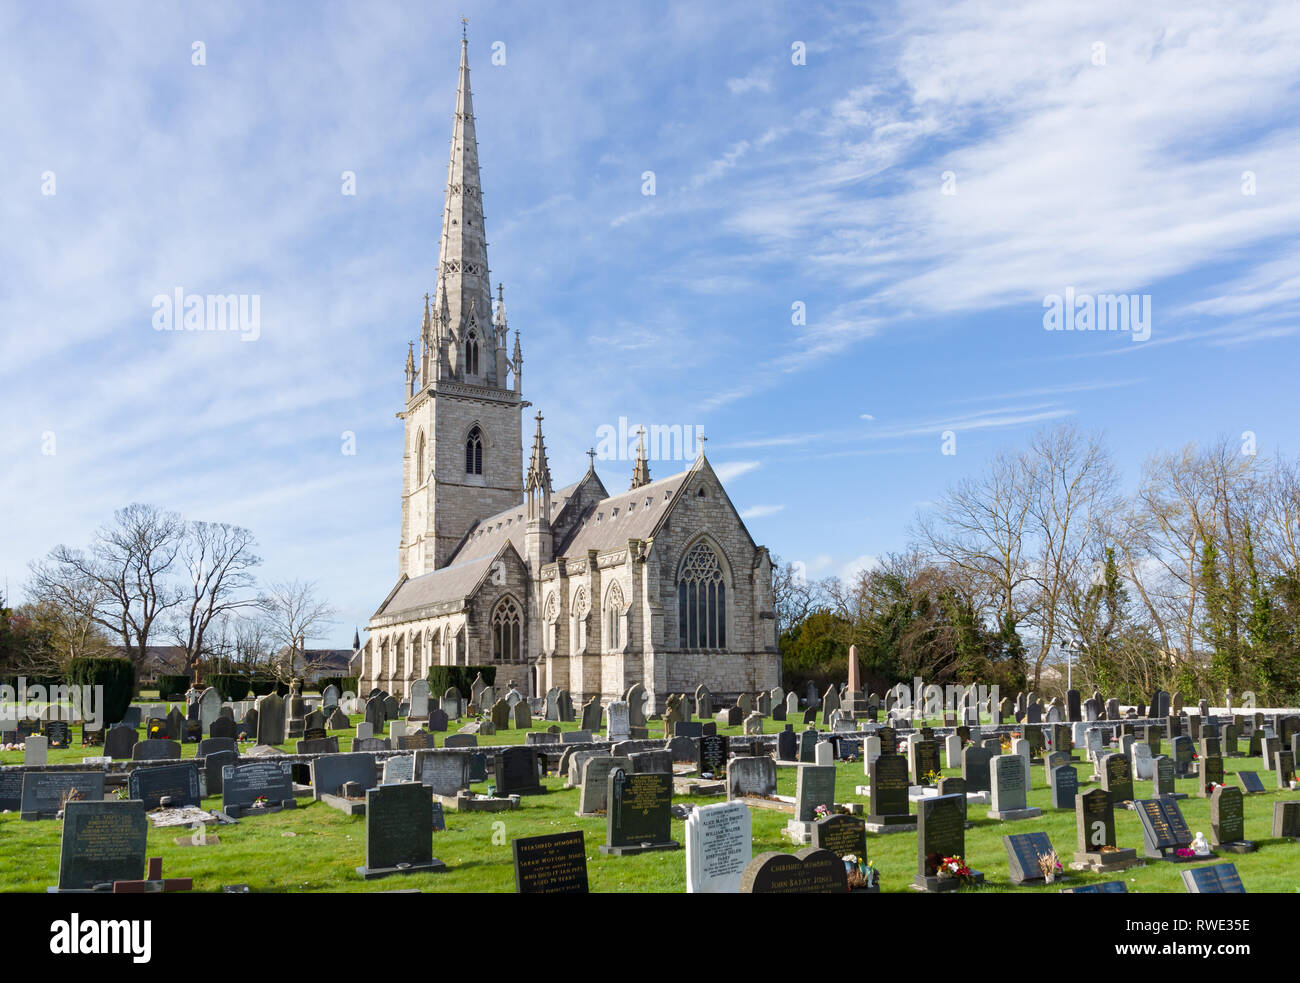 Saint Margarets church built in 1860 also known as the marble church and is a prominent landmark in Bodelwyddan North Wales. Stock Photo